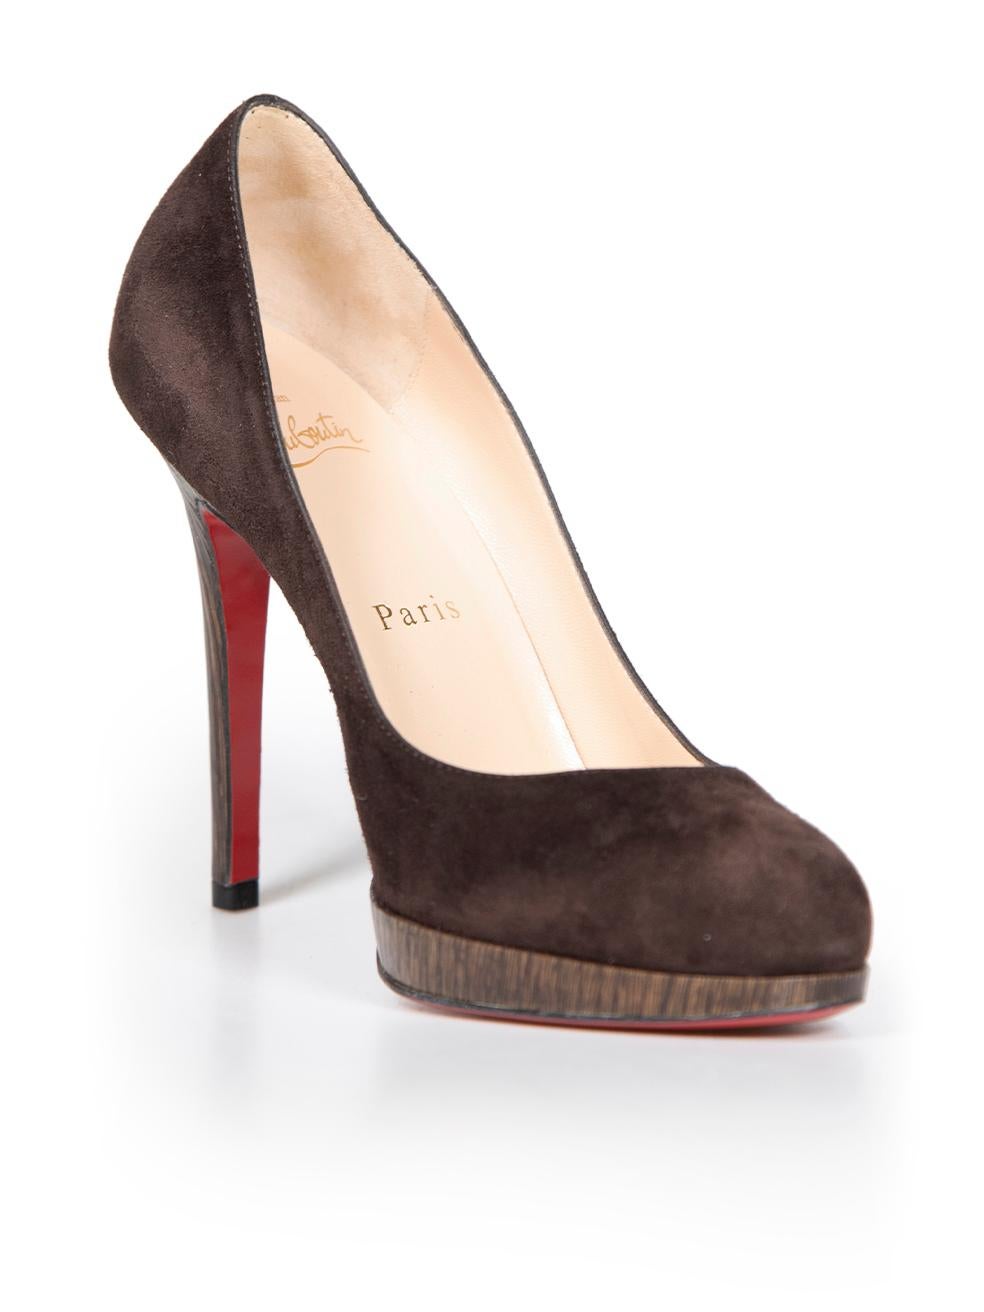 CONDITION is Never worn. No visible wear to heels is evident on this new Christian Louboutin designer resale item.
 
 
 
 Details
 
 
 Brown
 
 Suede
 
 Slip on pumps
 
 Almond toe
 
 High platform heel
 
 Wooden heel
 
 
 
 
 
 Made in Italy
 
 
 
